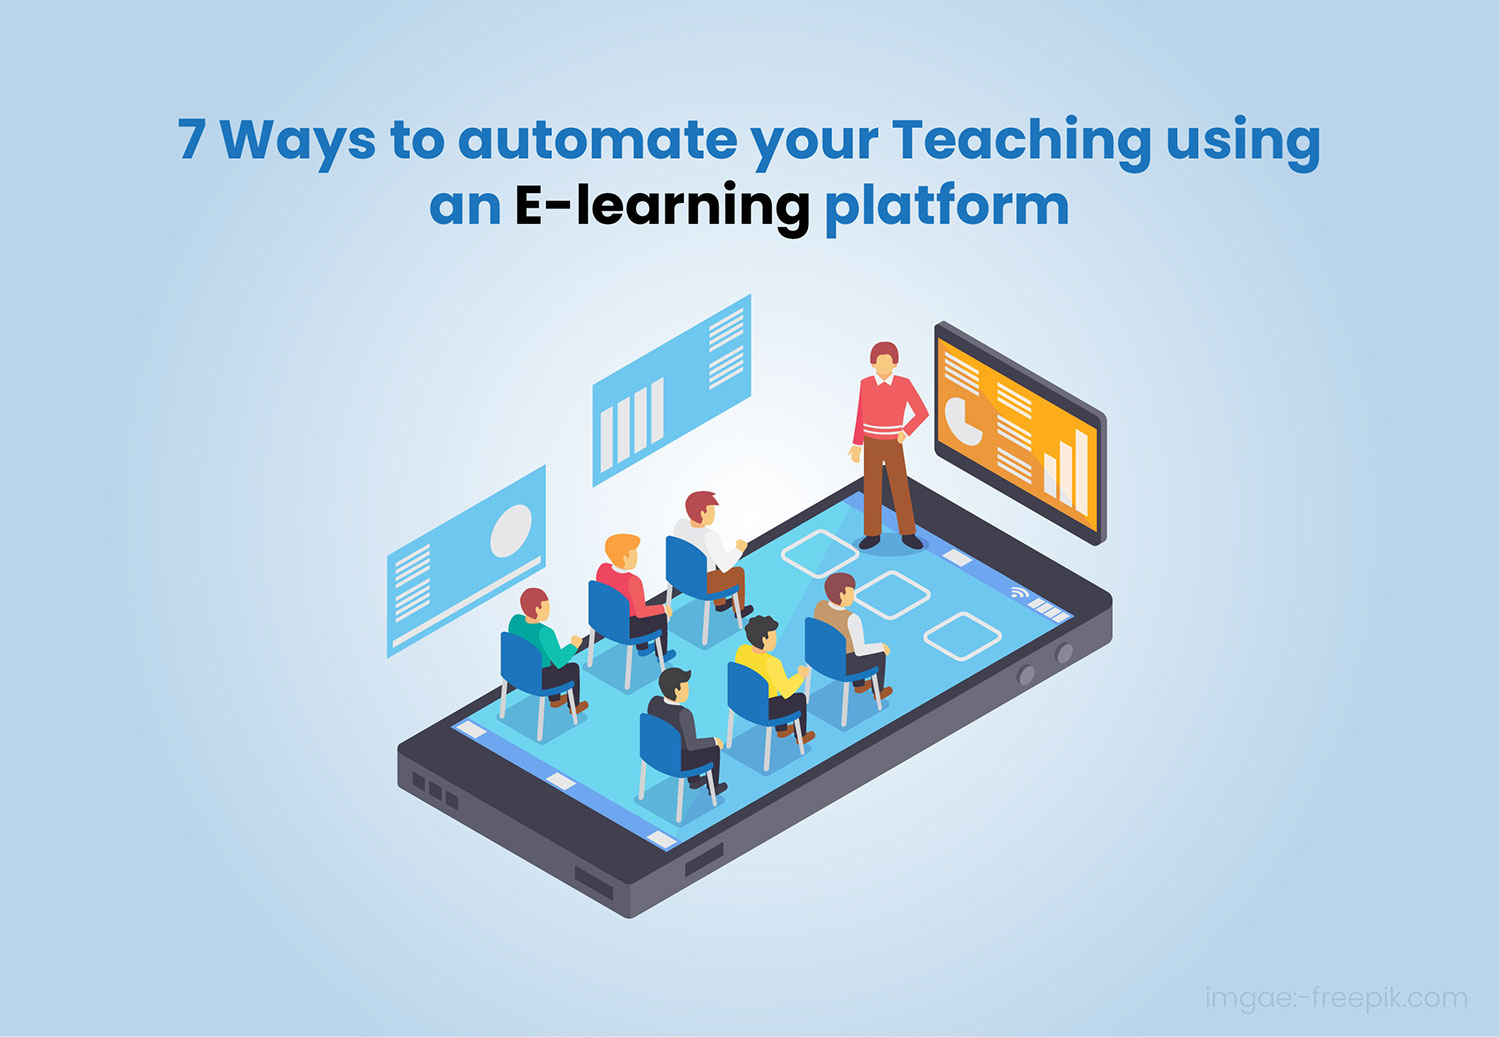 7 Ways to Automate Your Teaching using E-Learning Platform